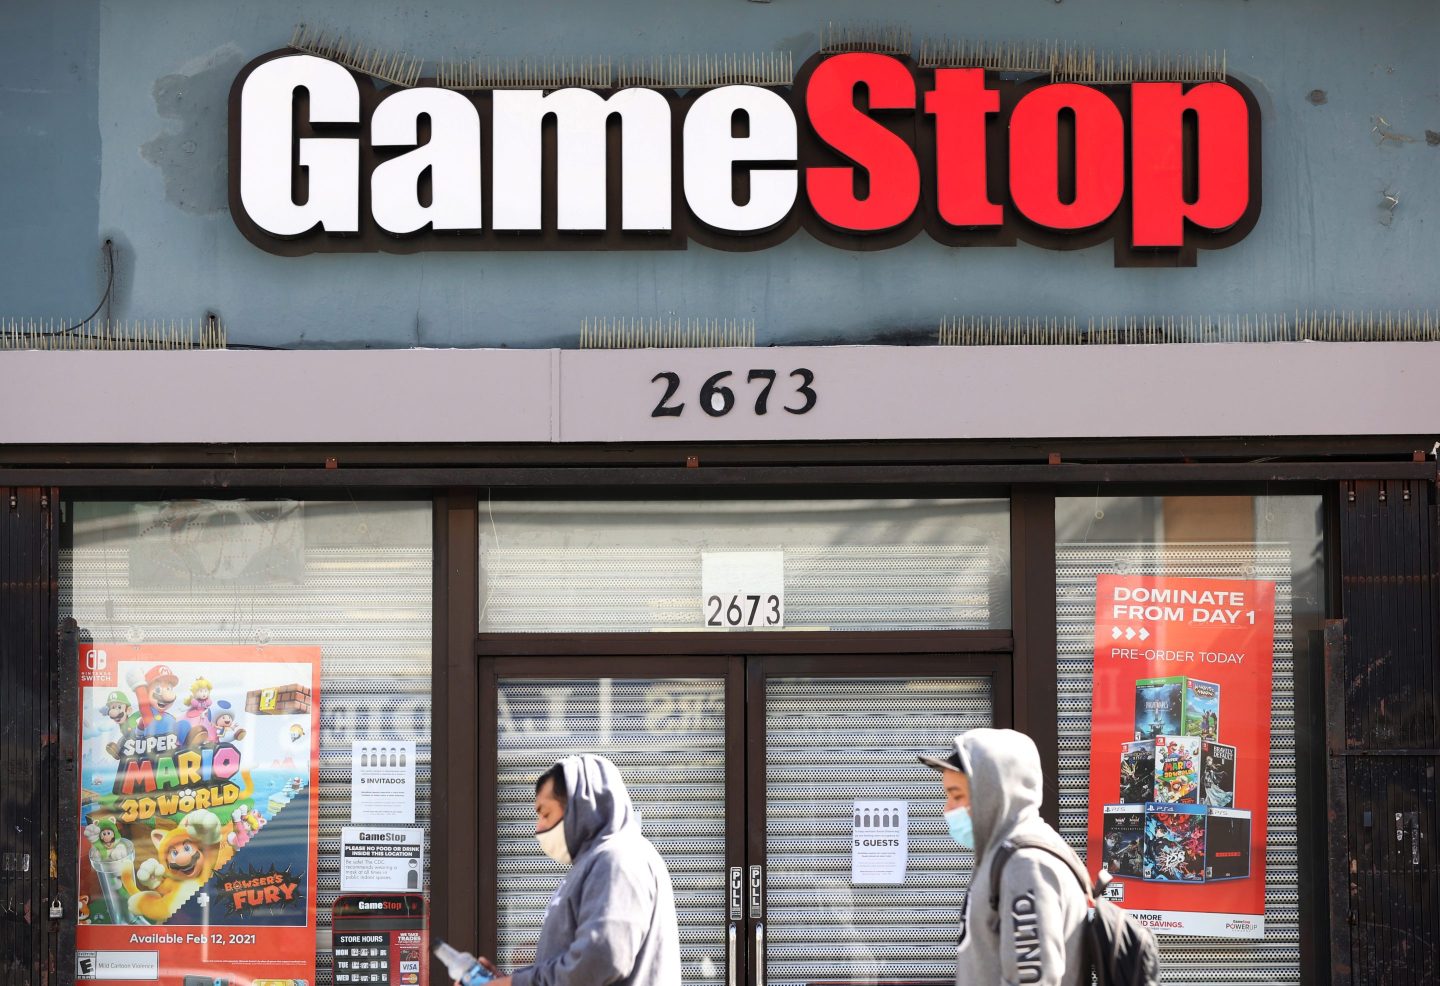 Share prices in GameStop Corp almost doubled on Monday morning.